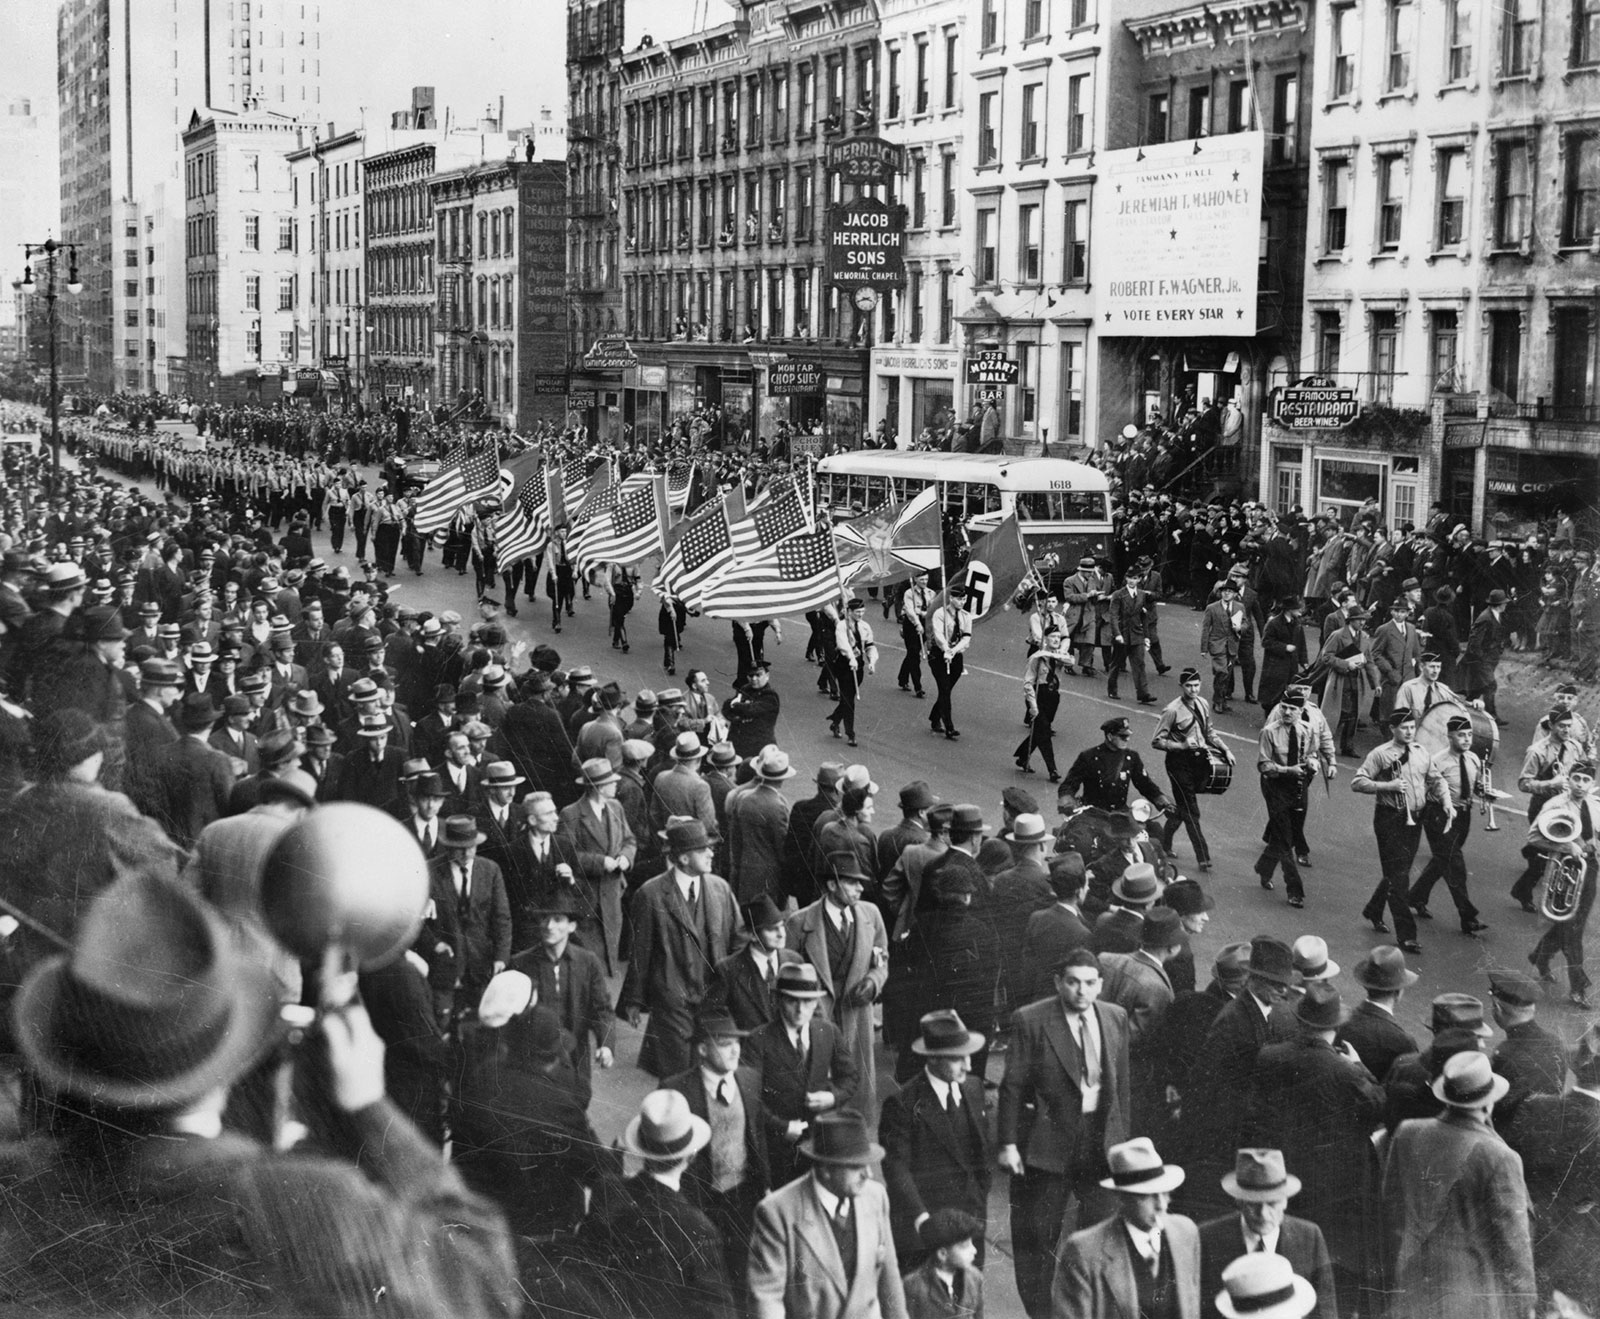 German American Band, "American Nazis" parade on East 86th St., New York City, October 30, 1939